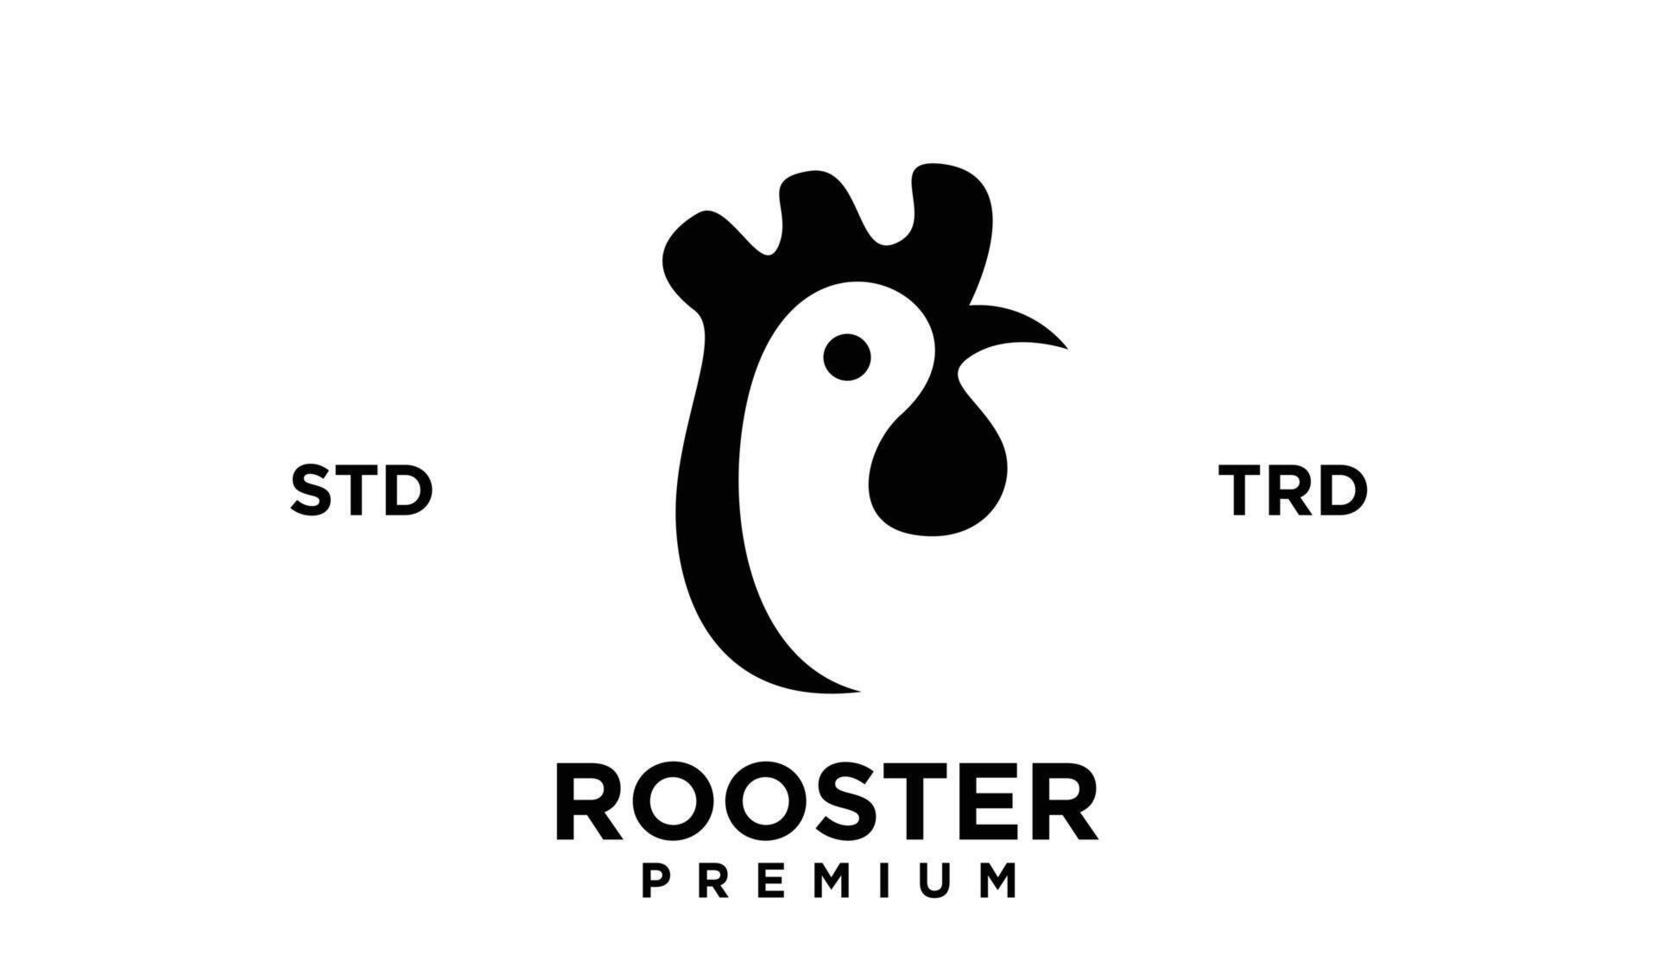 Rooster silhouette icon Vector illustration on white background